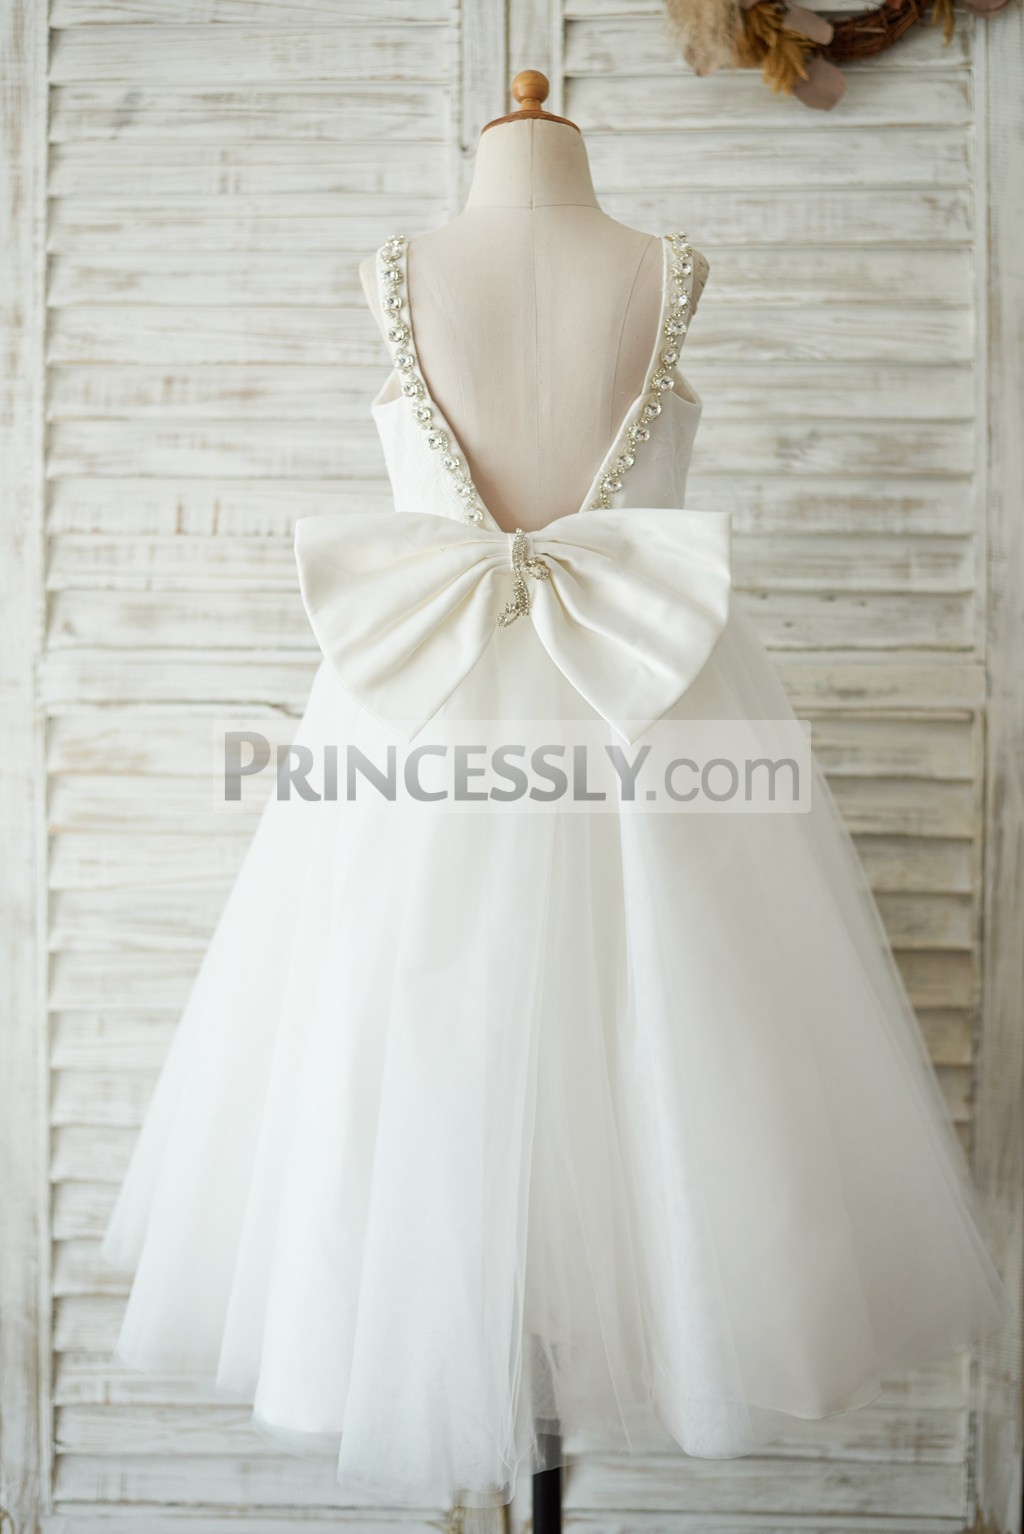 Open V back long wedding baby girl dress with a bow